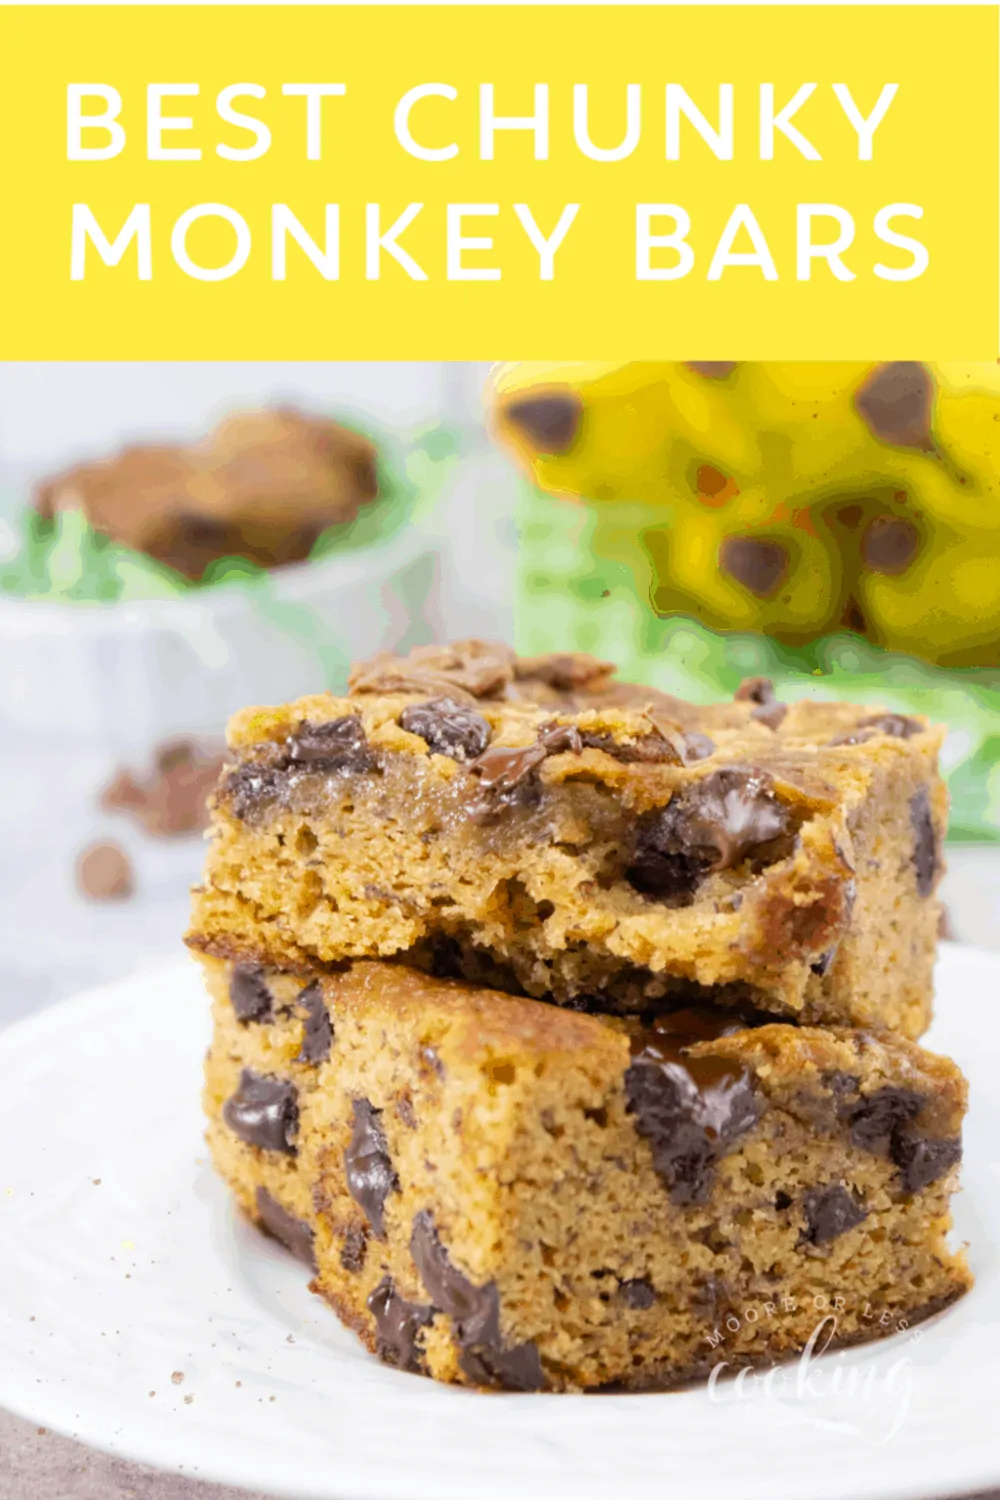 Best Chunky Monkey Bars. This is one of the best ways to use up those ripe bananas sitting on the counter. #cookiebars #banana #chocolate #dessertbar #mooreorlesscooking  via @Mooreorlesscook